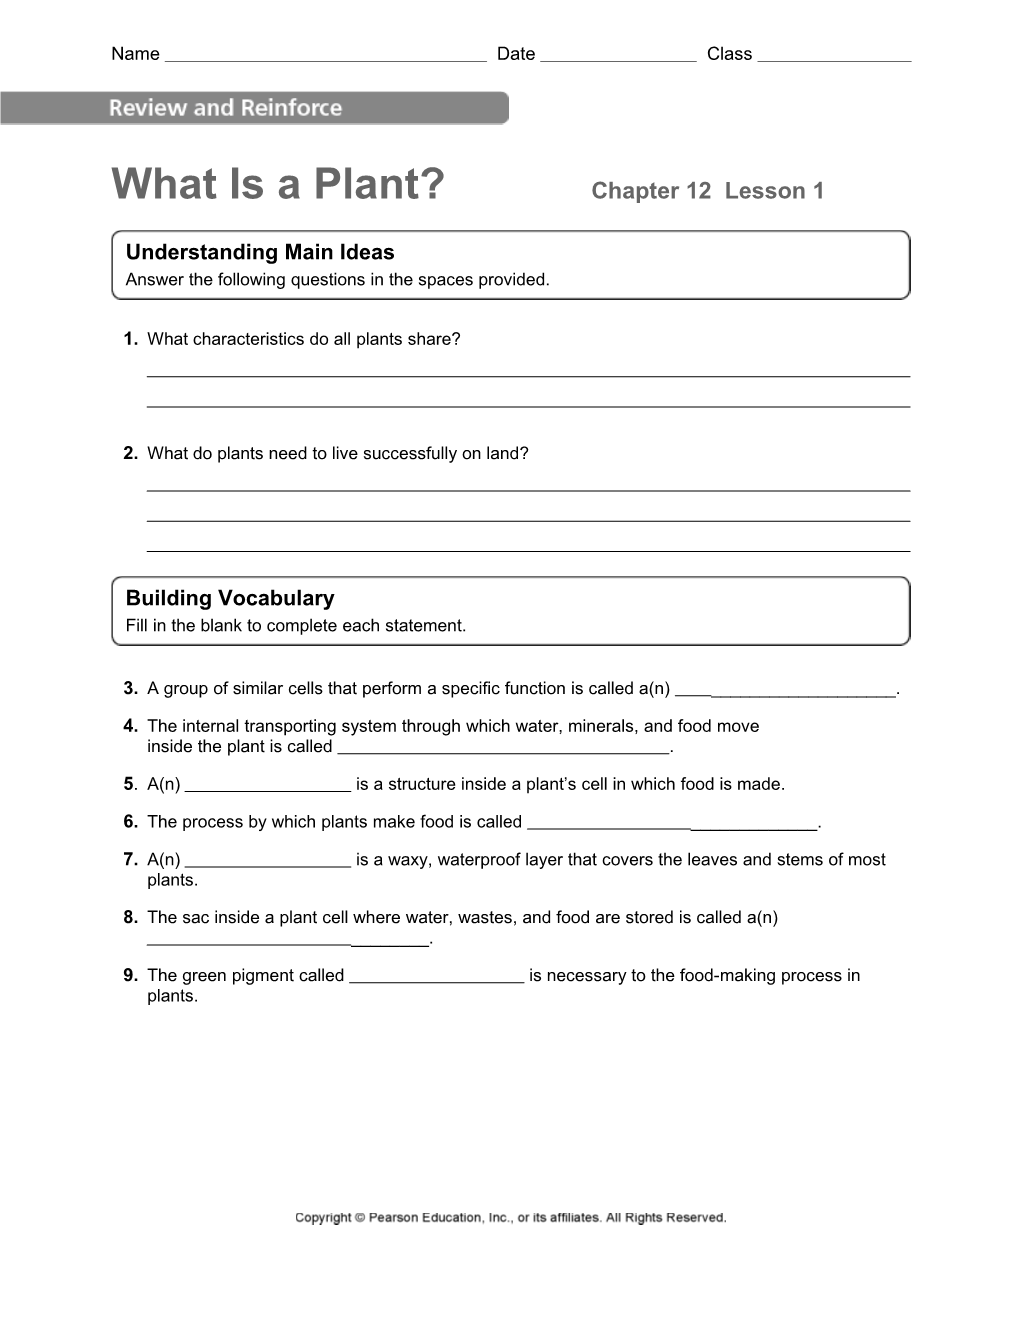 What Is a Plant?Chapter 12 Lesson 1